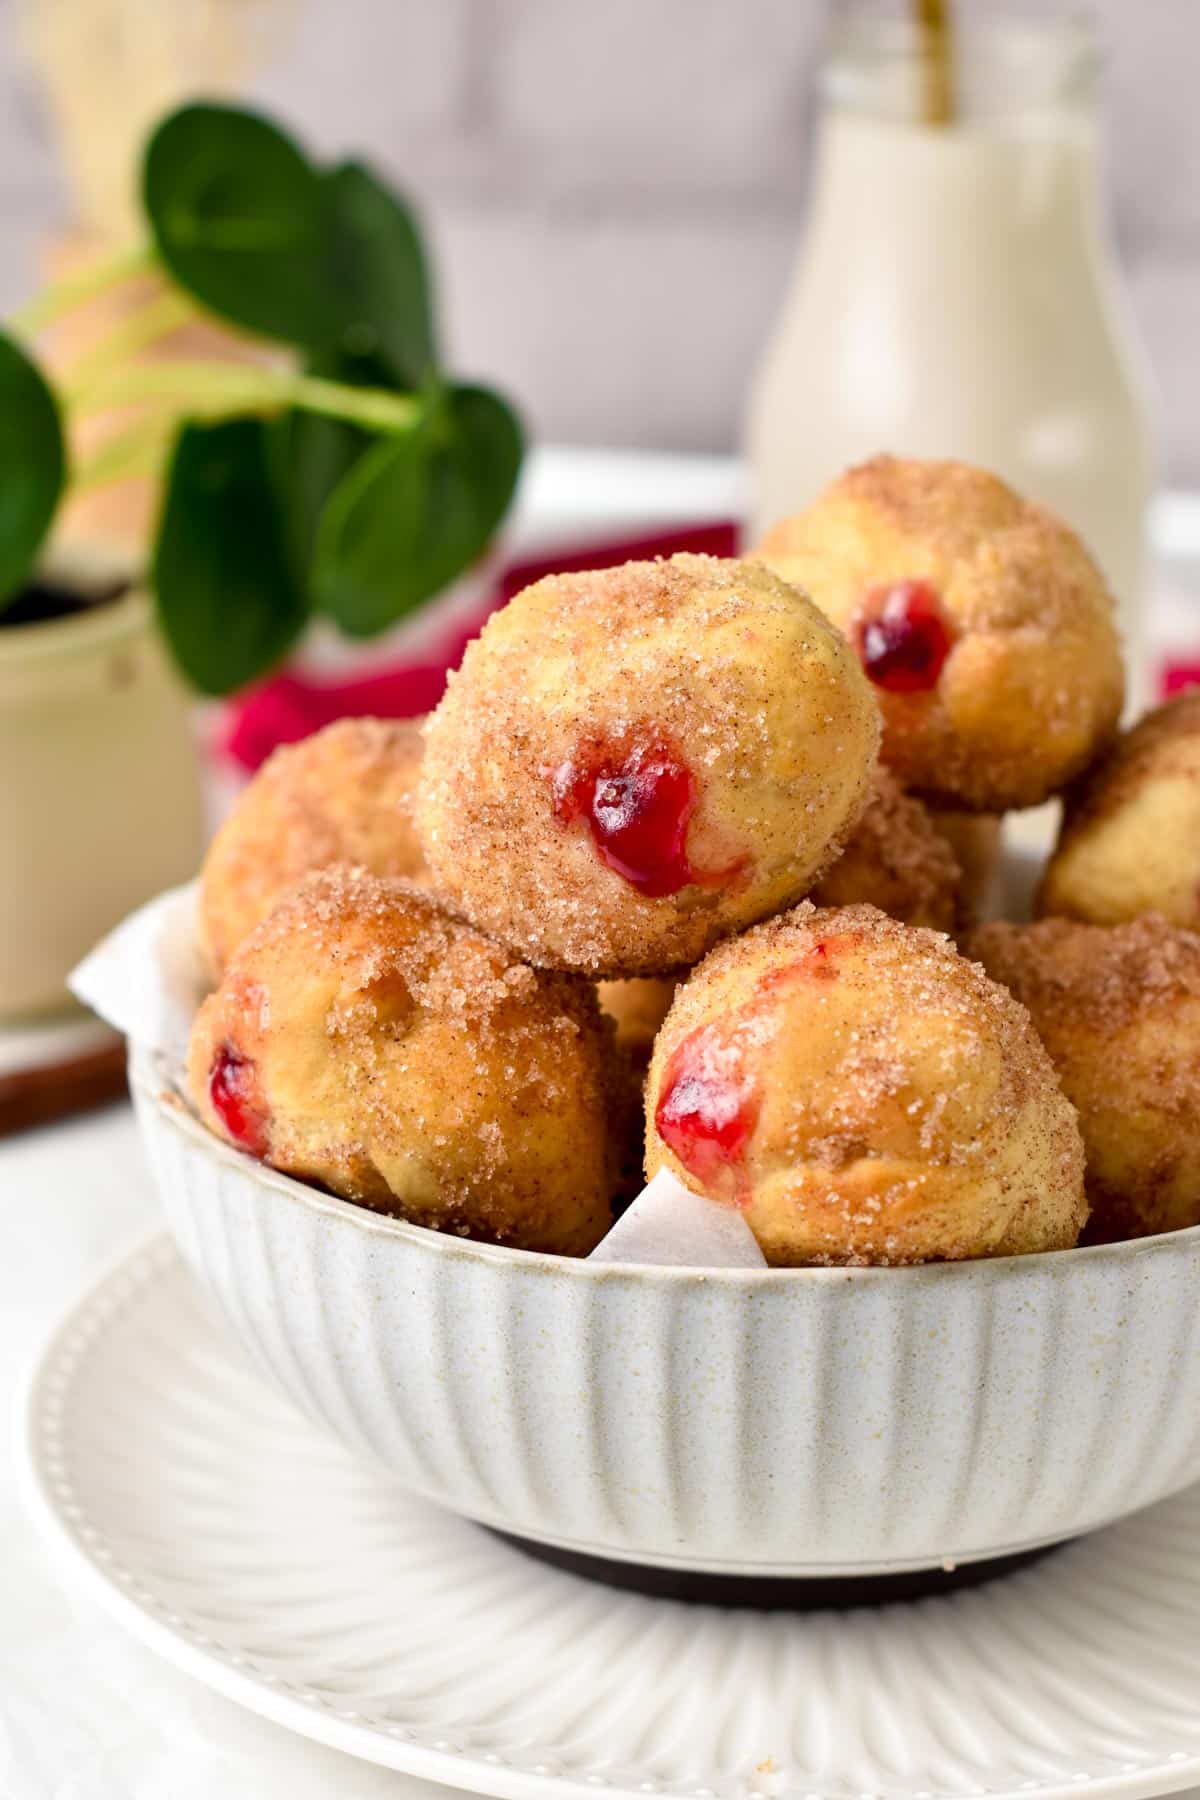 A bowl filled with jelly filled donut holes coated with cinnamon sugar and a green plant in the background.